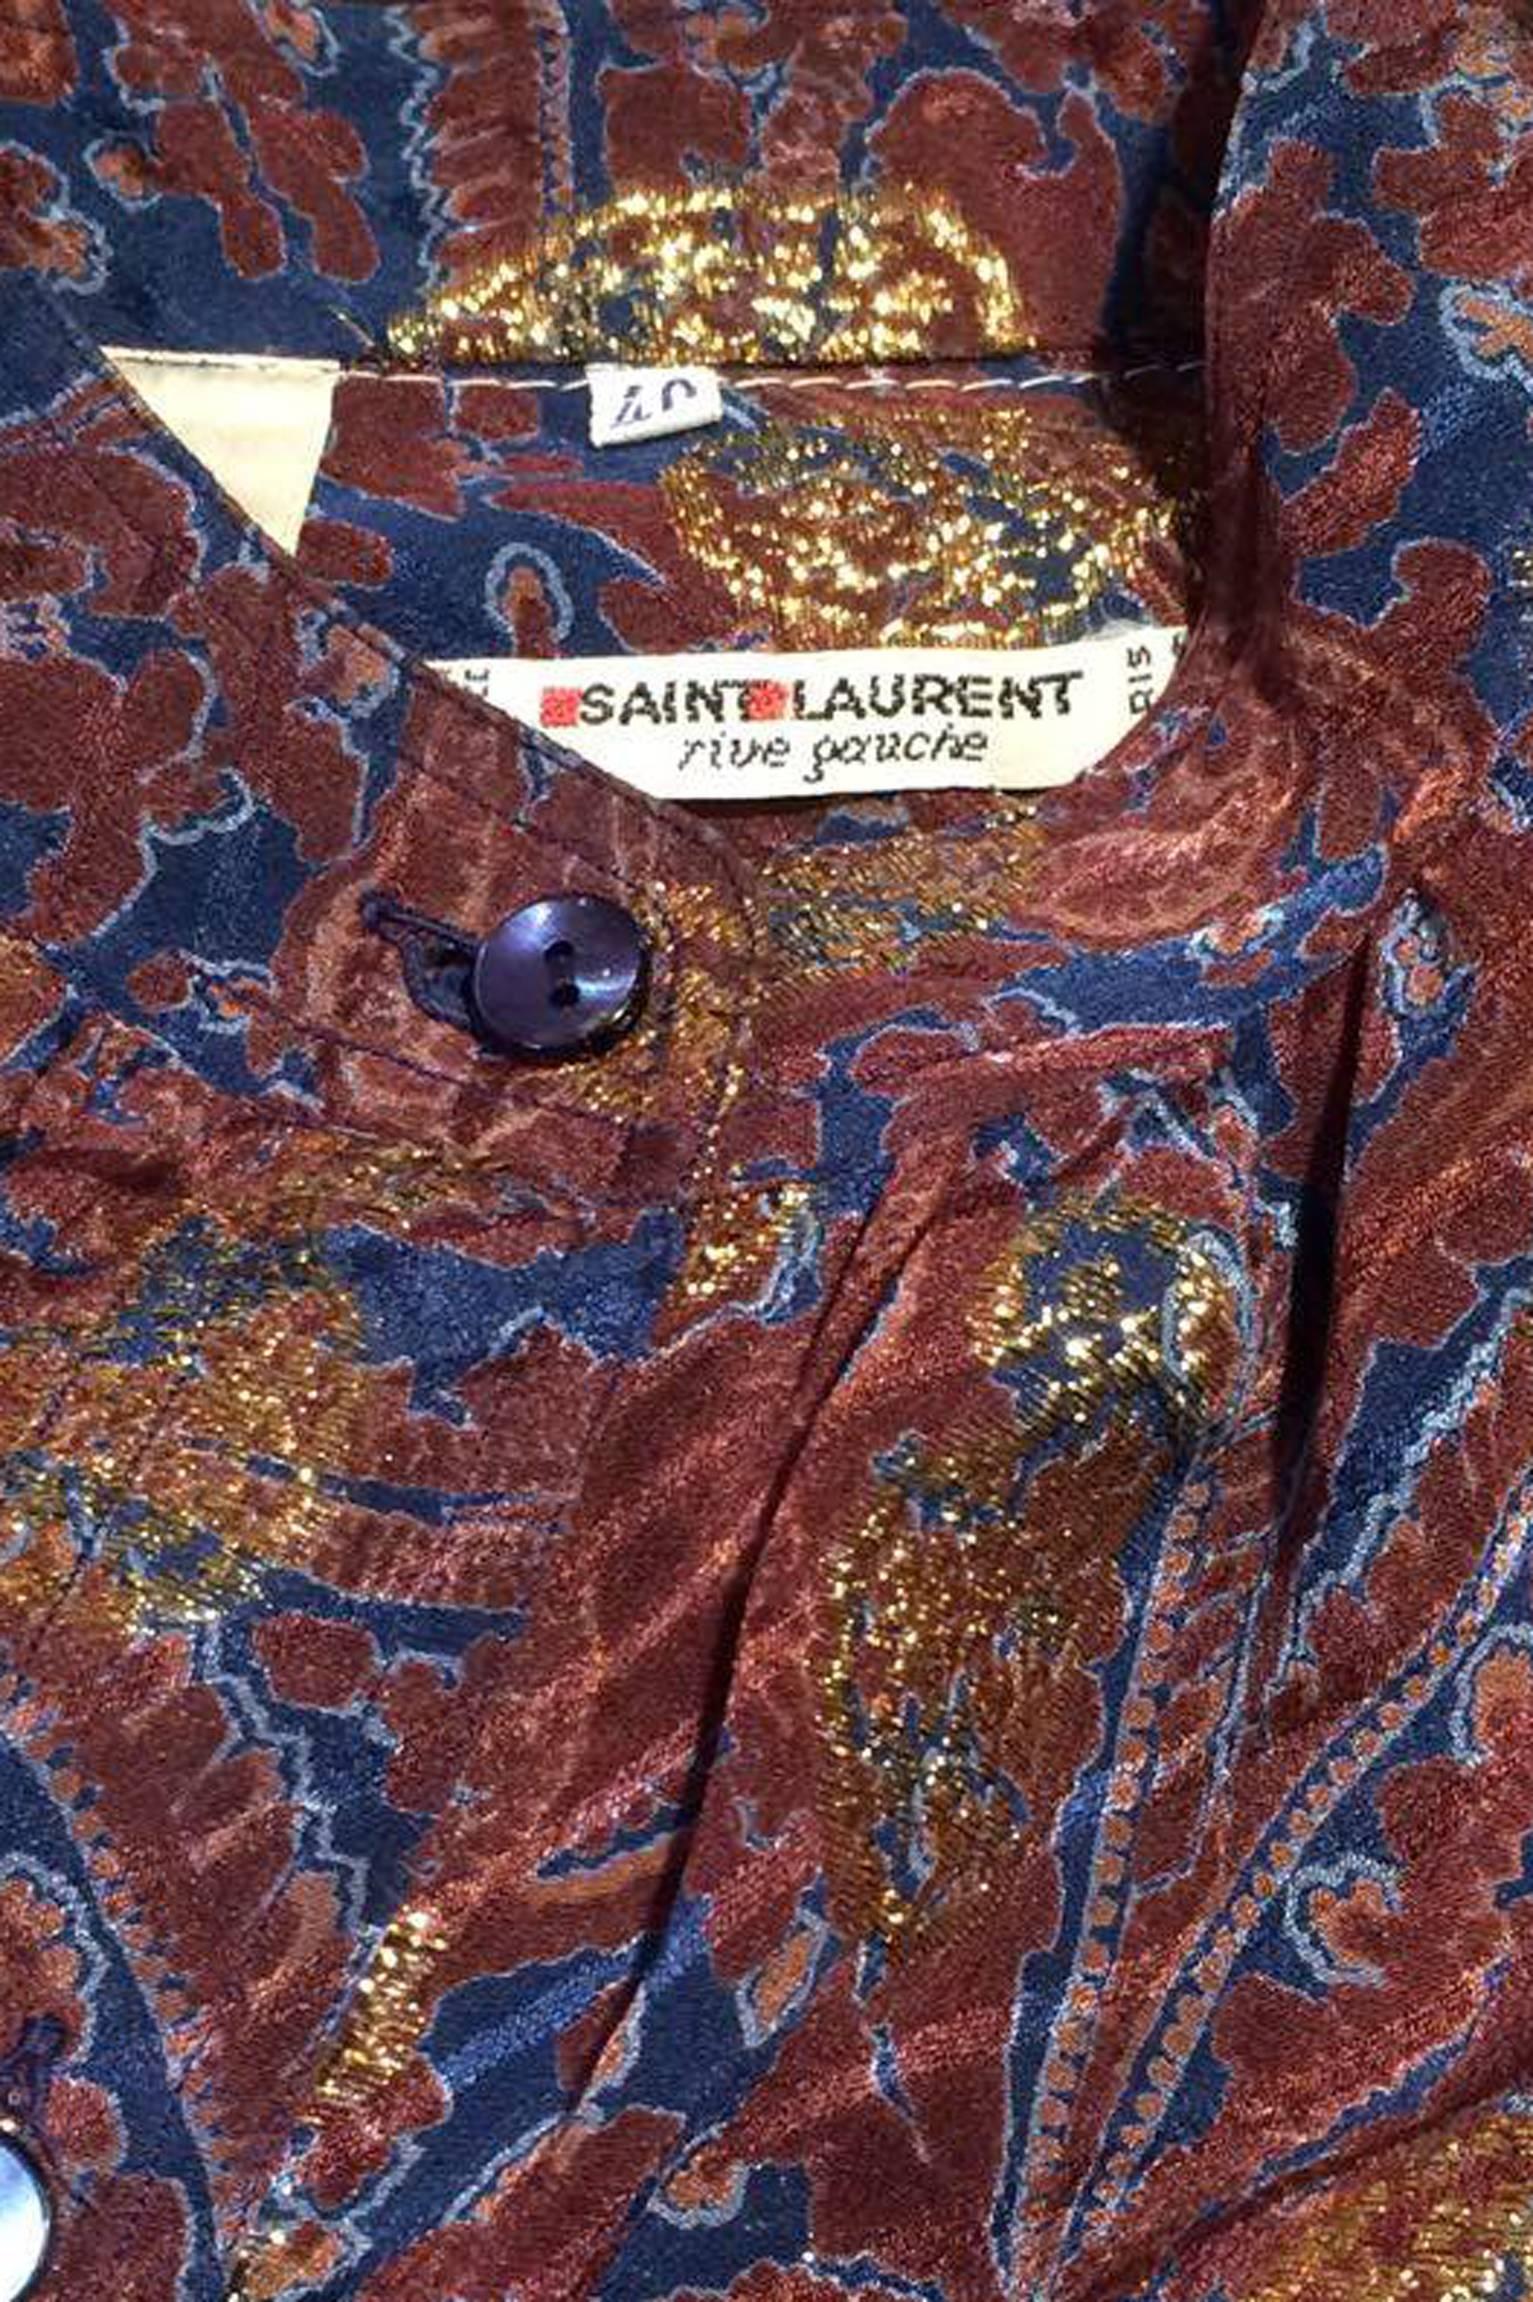 A ravishing 1970s Yves Saint Laurent Rive Gauche bordeaux silk blouse with a blue and gold lurex paisley print. The blouse has a front button closure and two-button cuffs. 

The size of the blouse corresponds to a modern size Extra-Small.